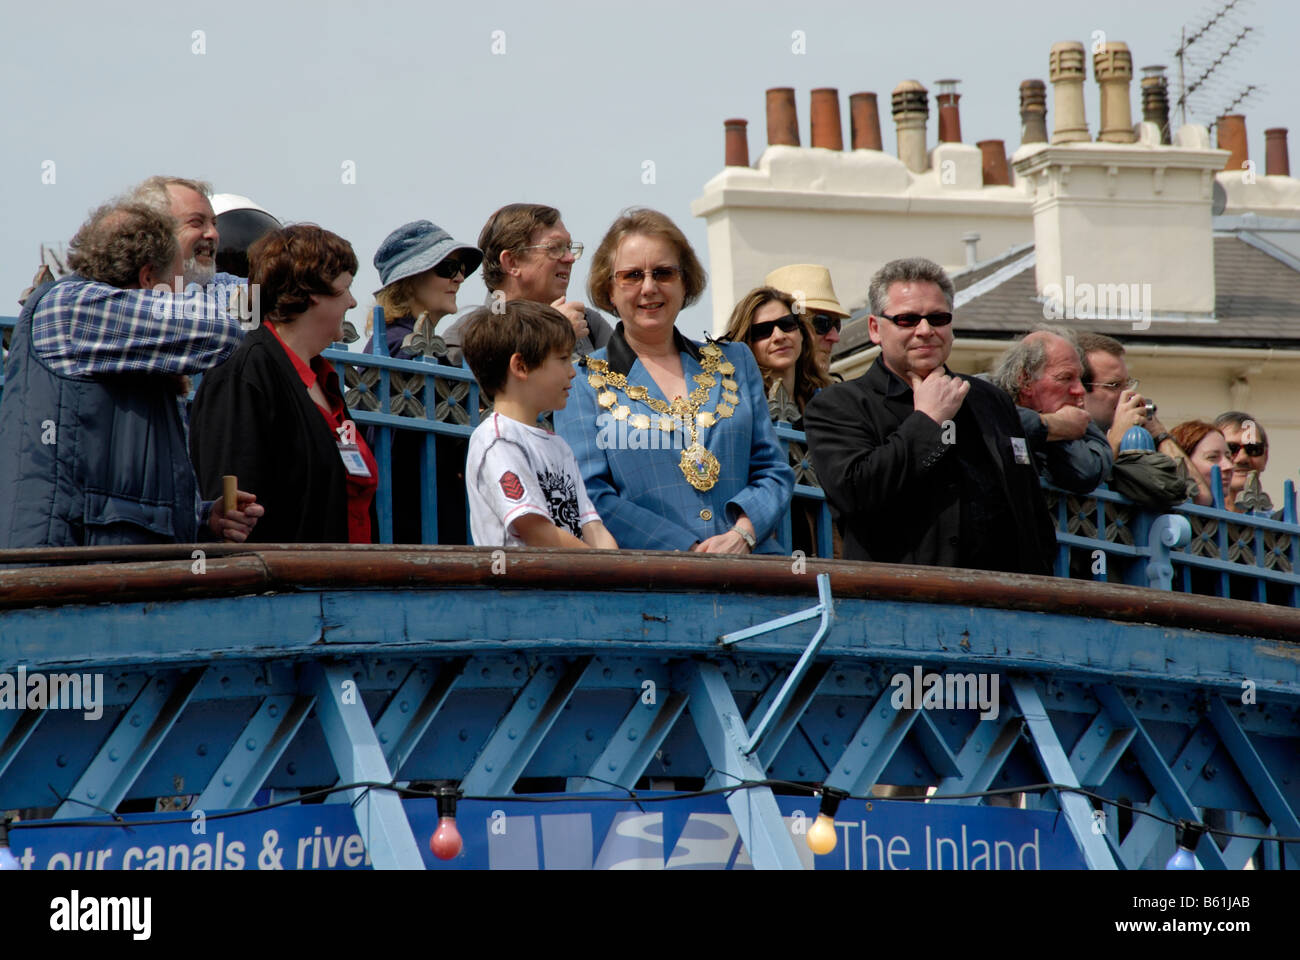 Carolyn Keen, Lord Mayor of Westminster 2007 - 2008, presiding at the Canalway Cavalcade in Little Venice, Westminster, London Stock Photo